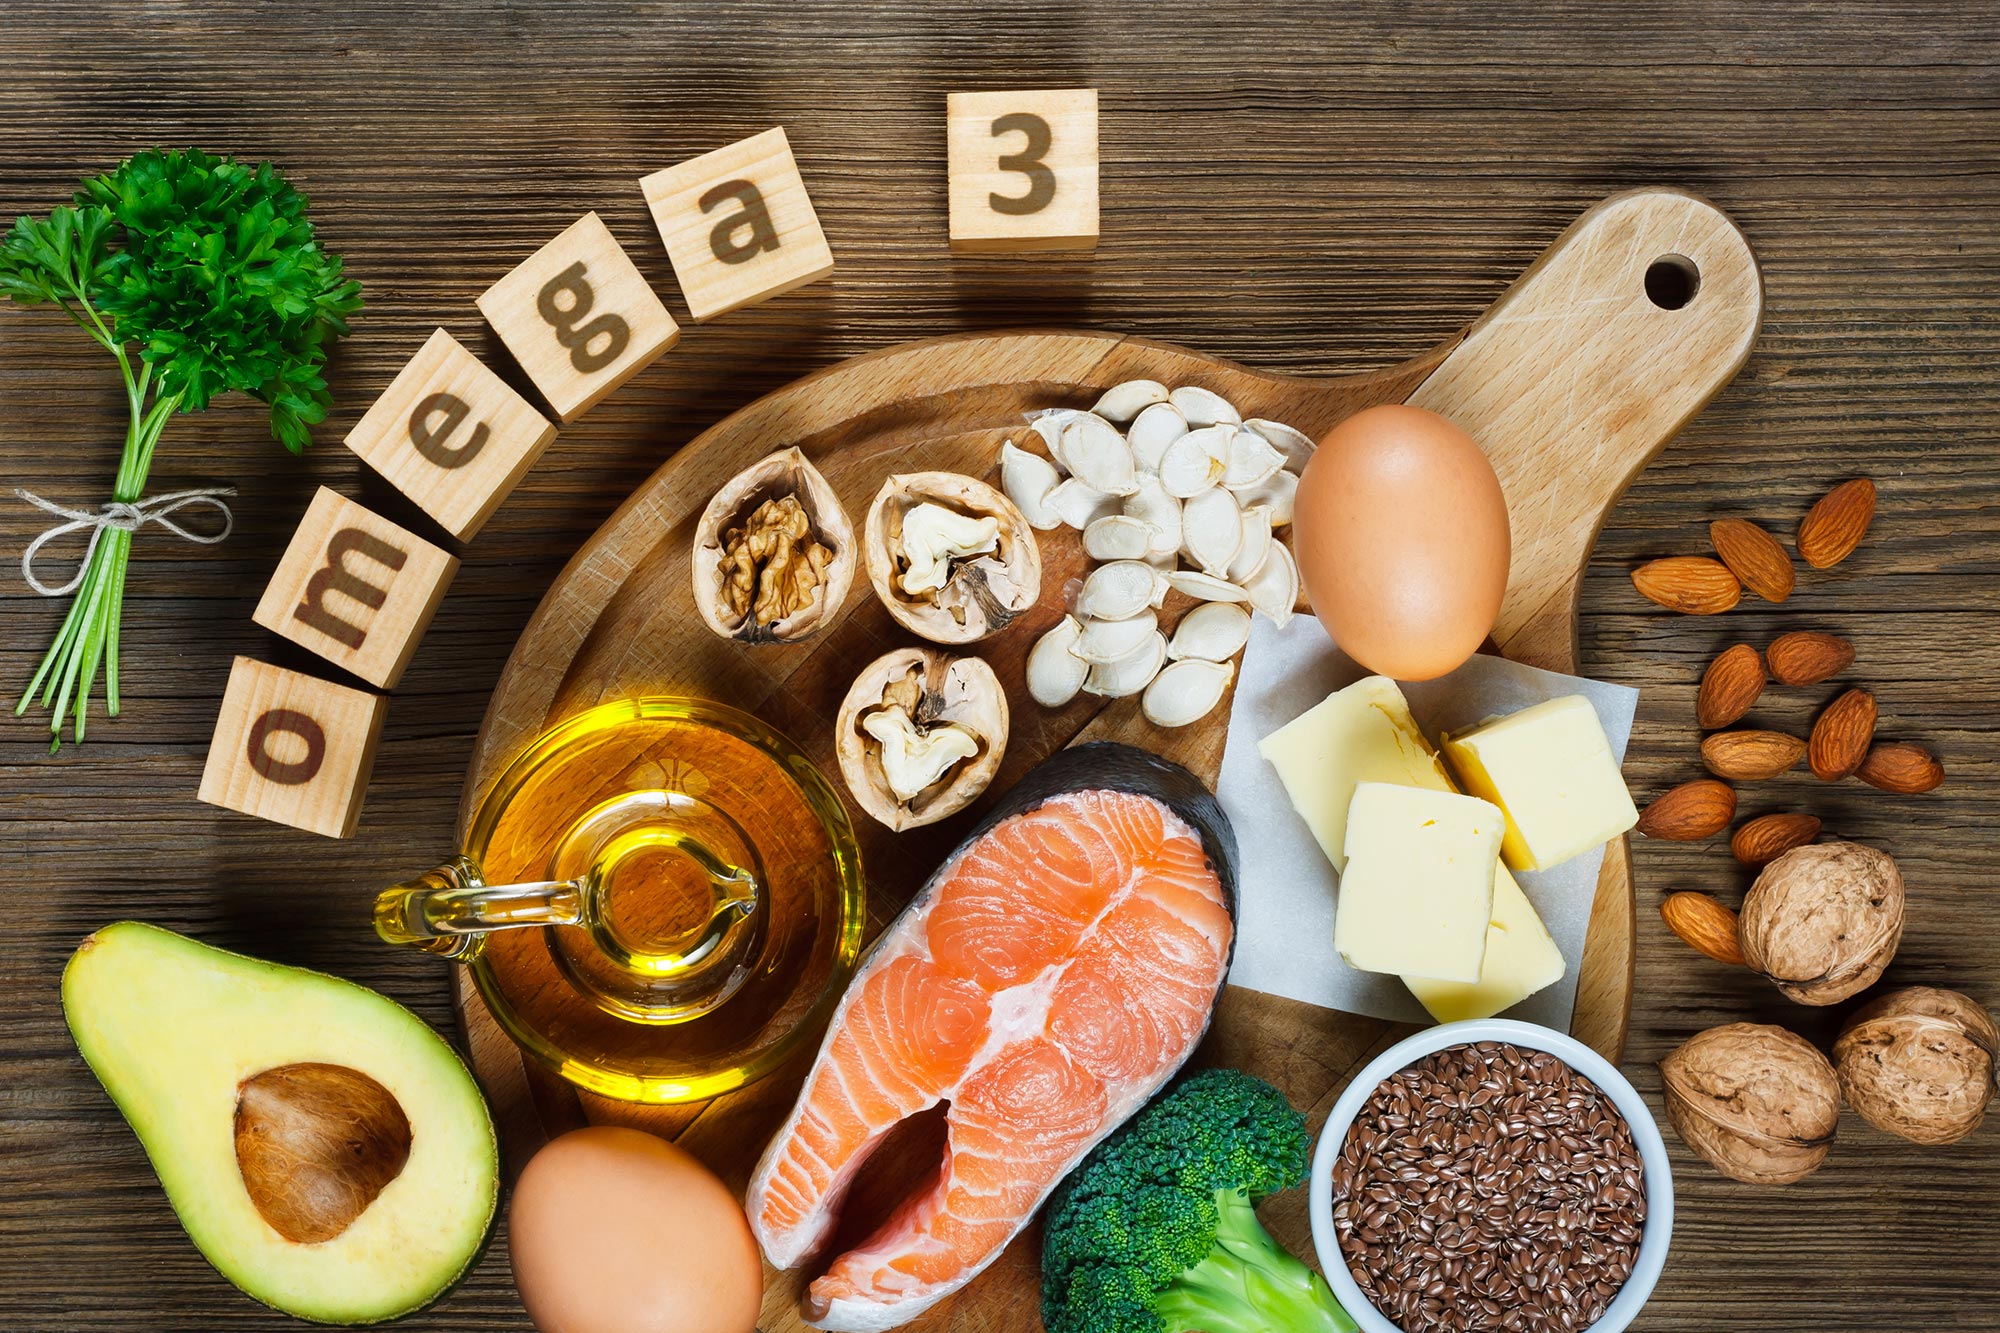 The 14 Foods with the most Omega-3 Fatty Acids